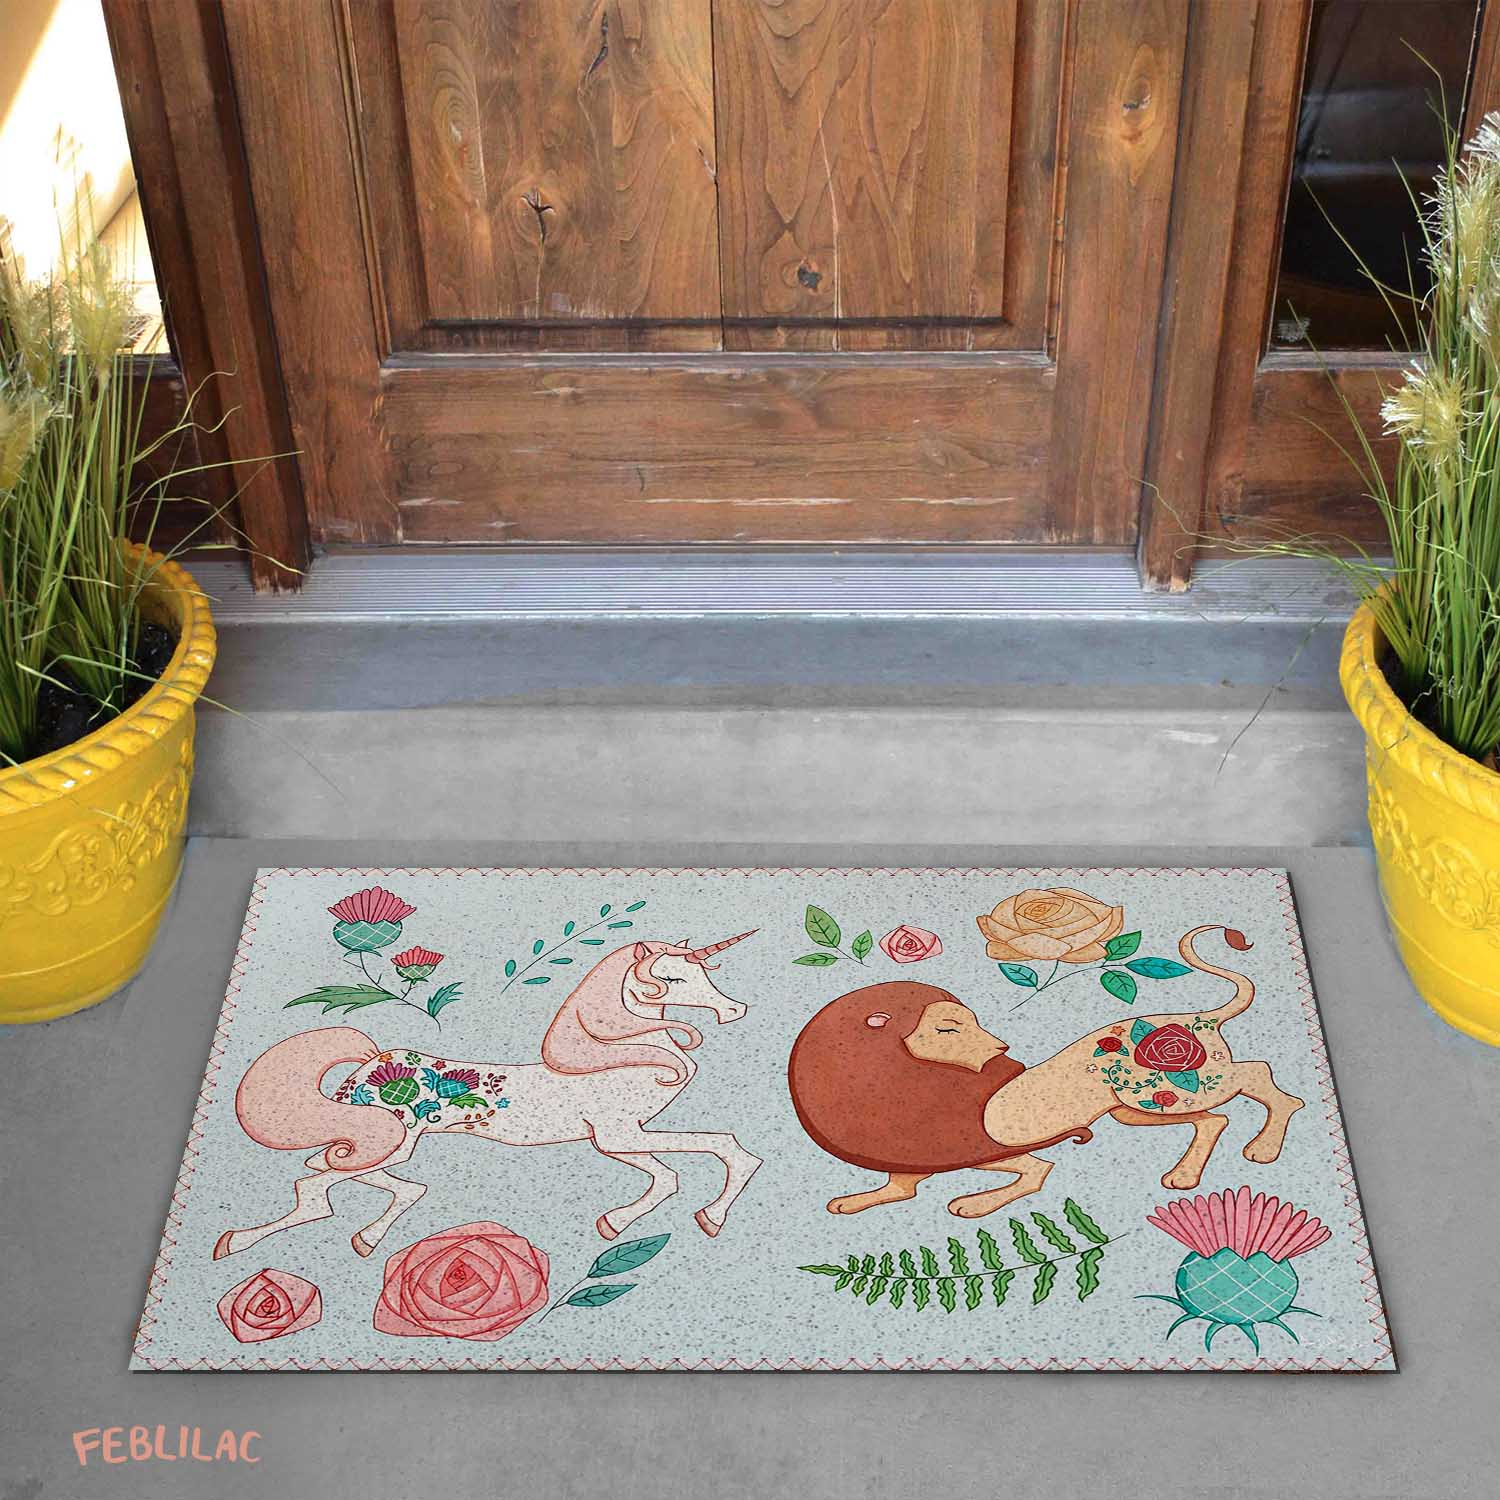 Feblilac The Lion and the Unicorn Door Mat by AmeliaRose Illustrations from UK